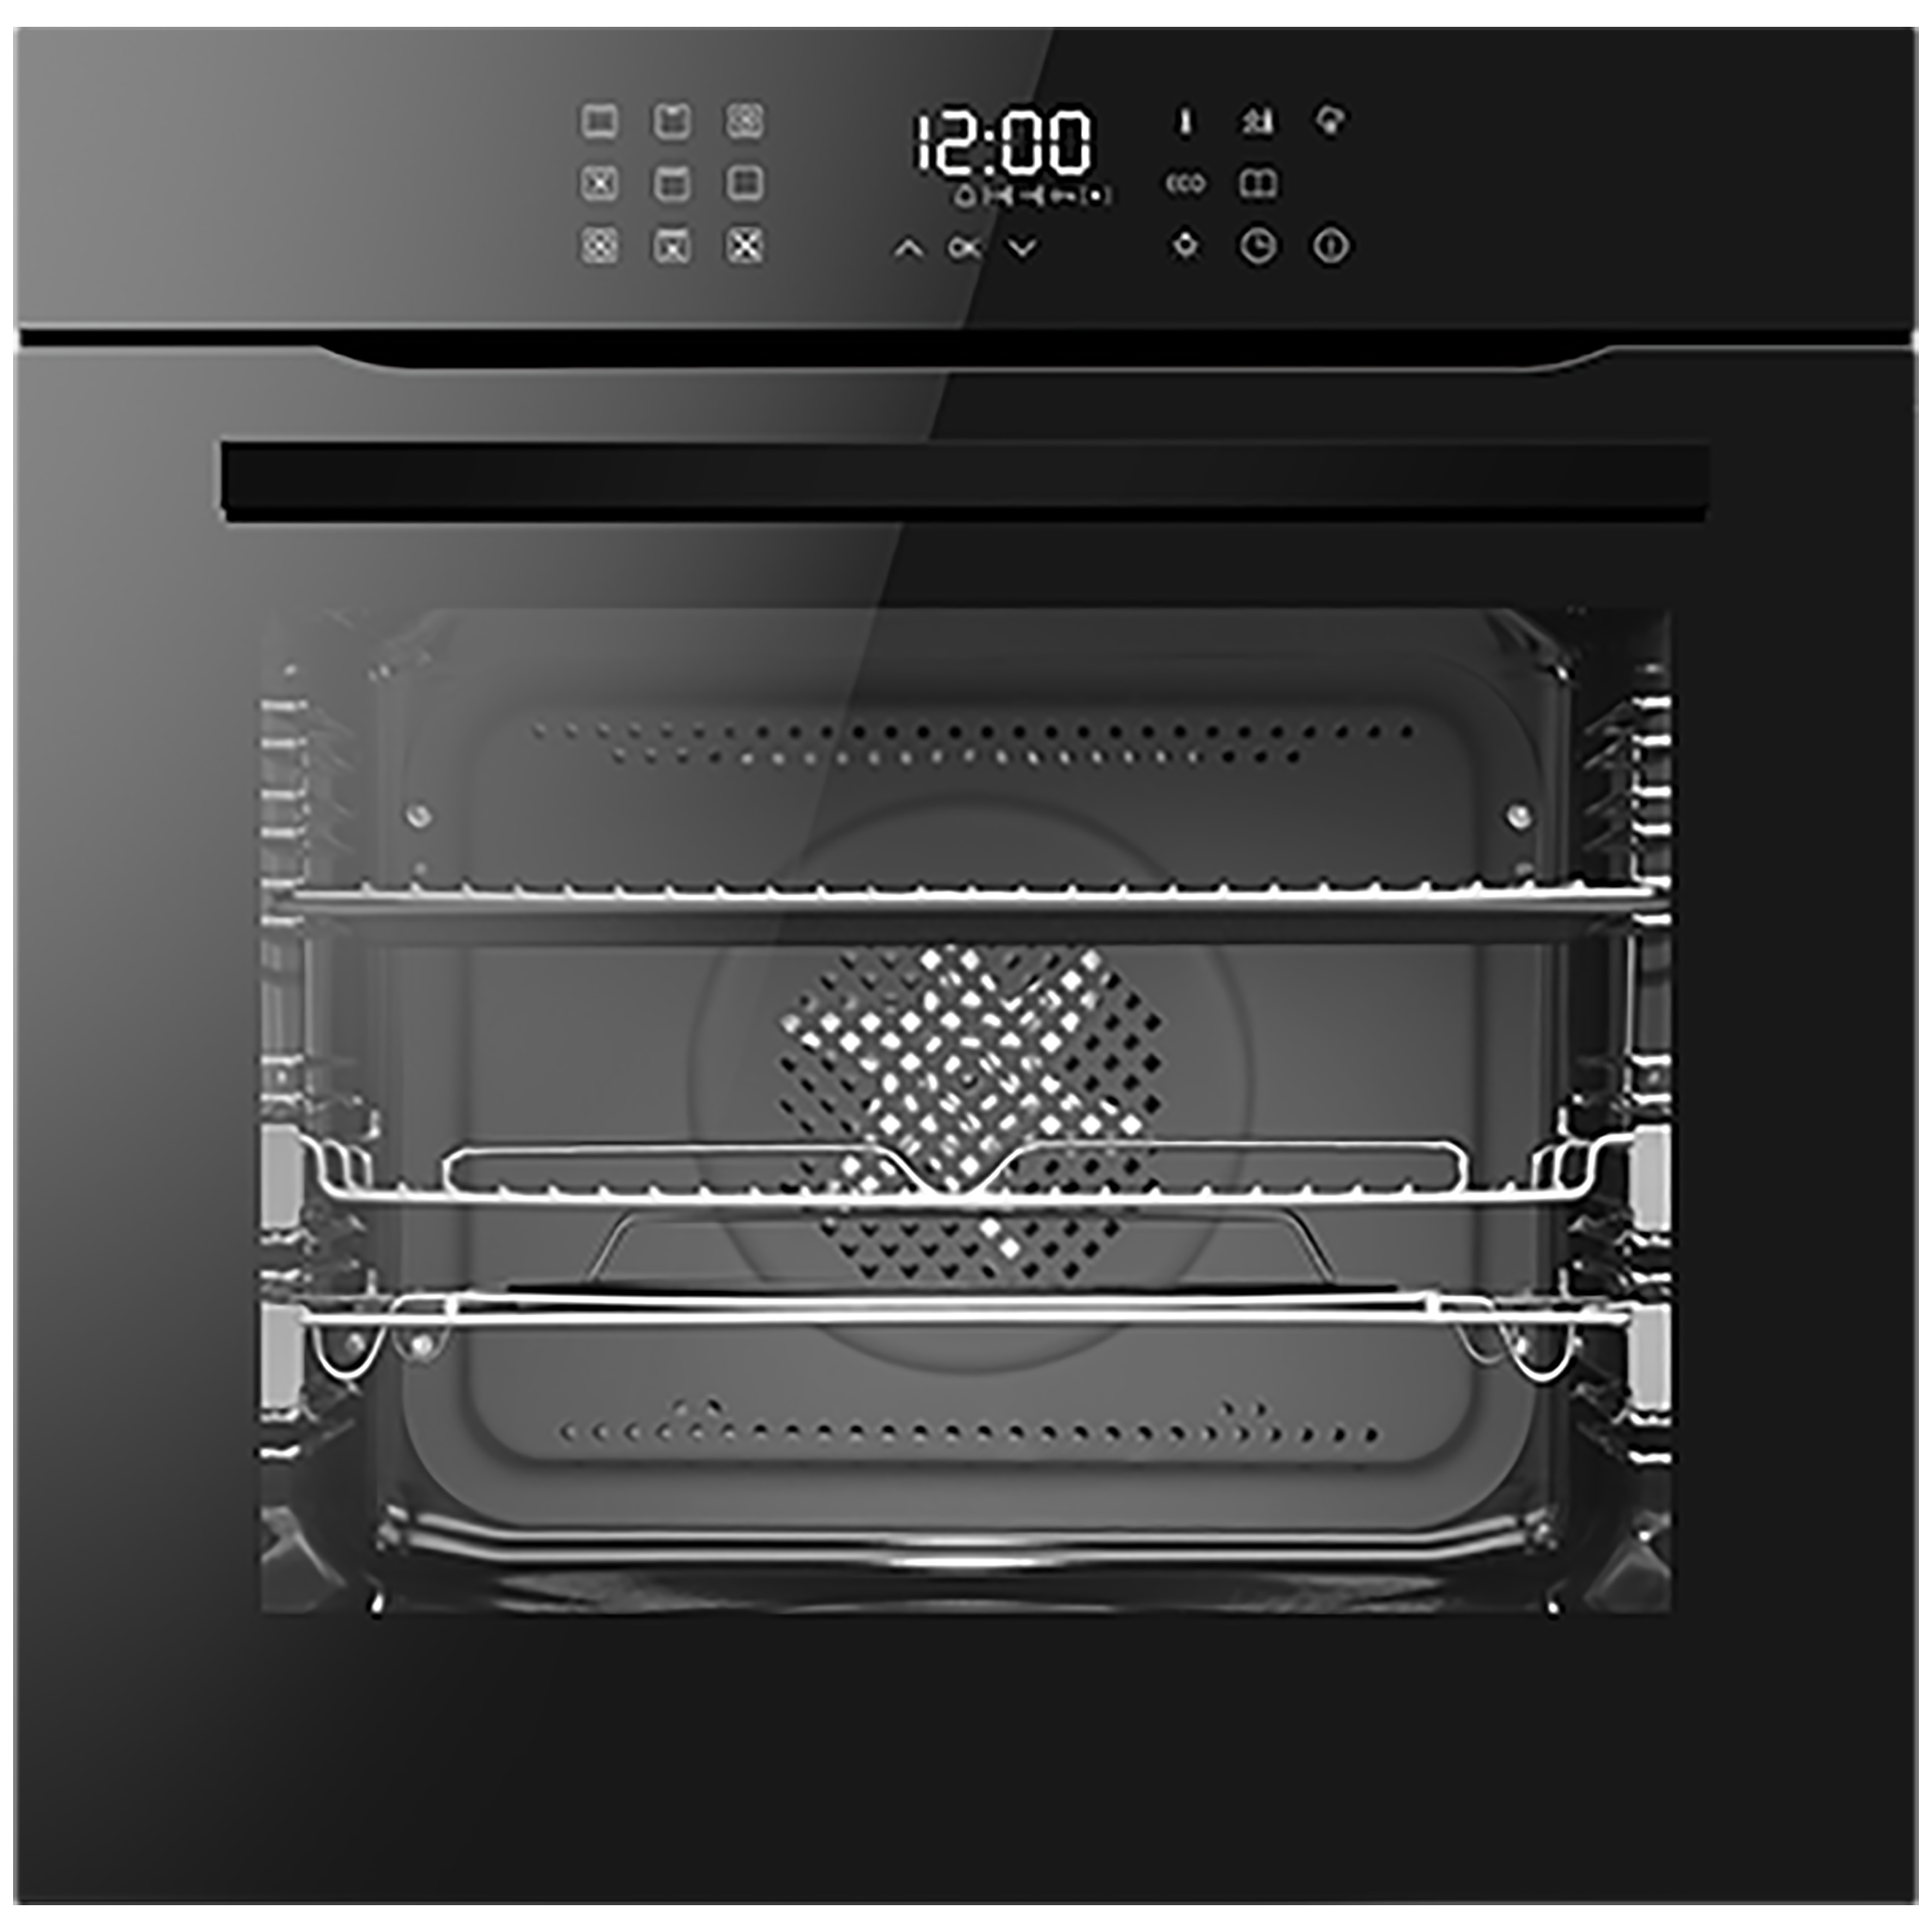 SL400BL - Thirteen function multifunction oven with steam clean